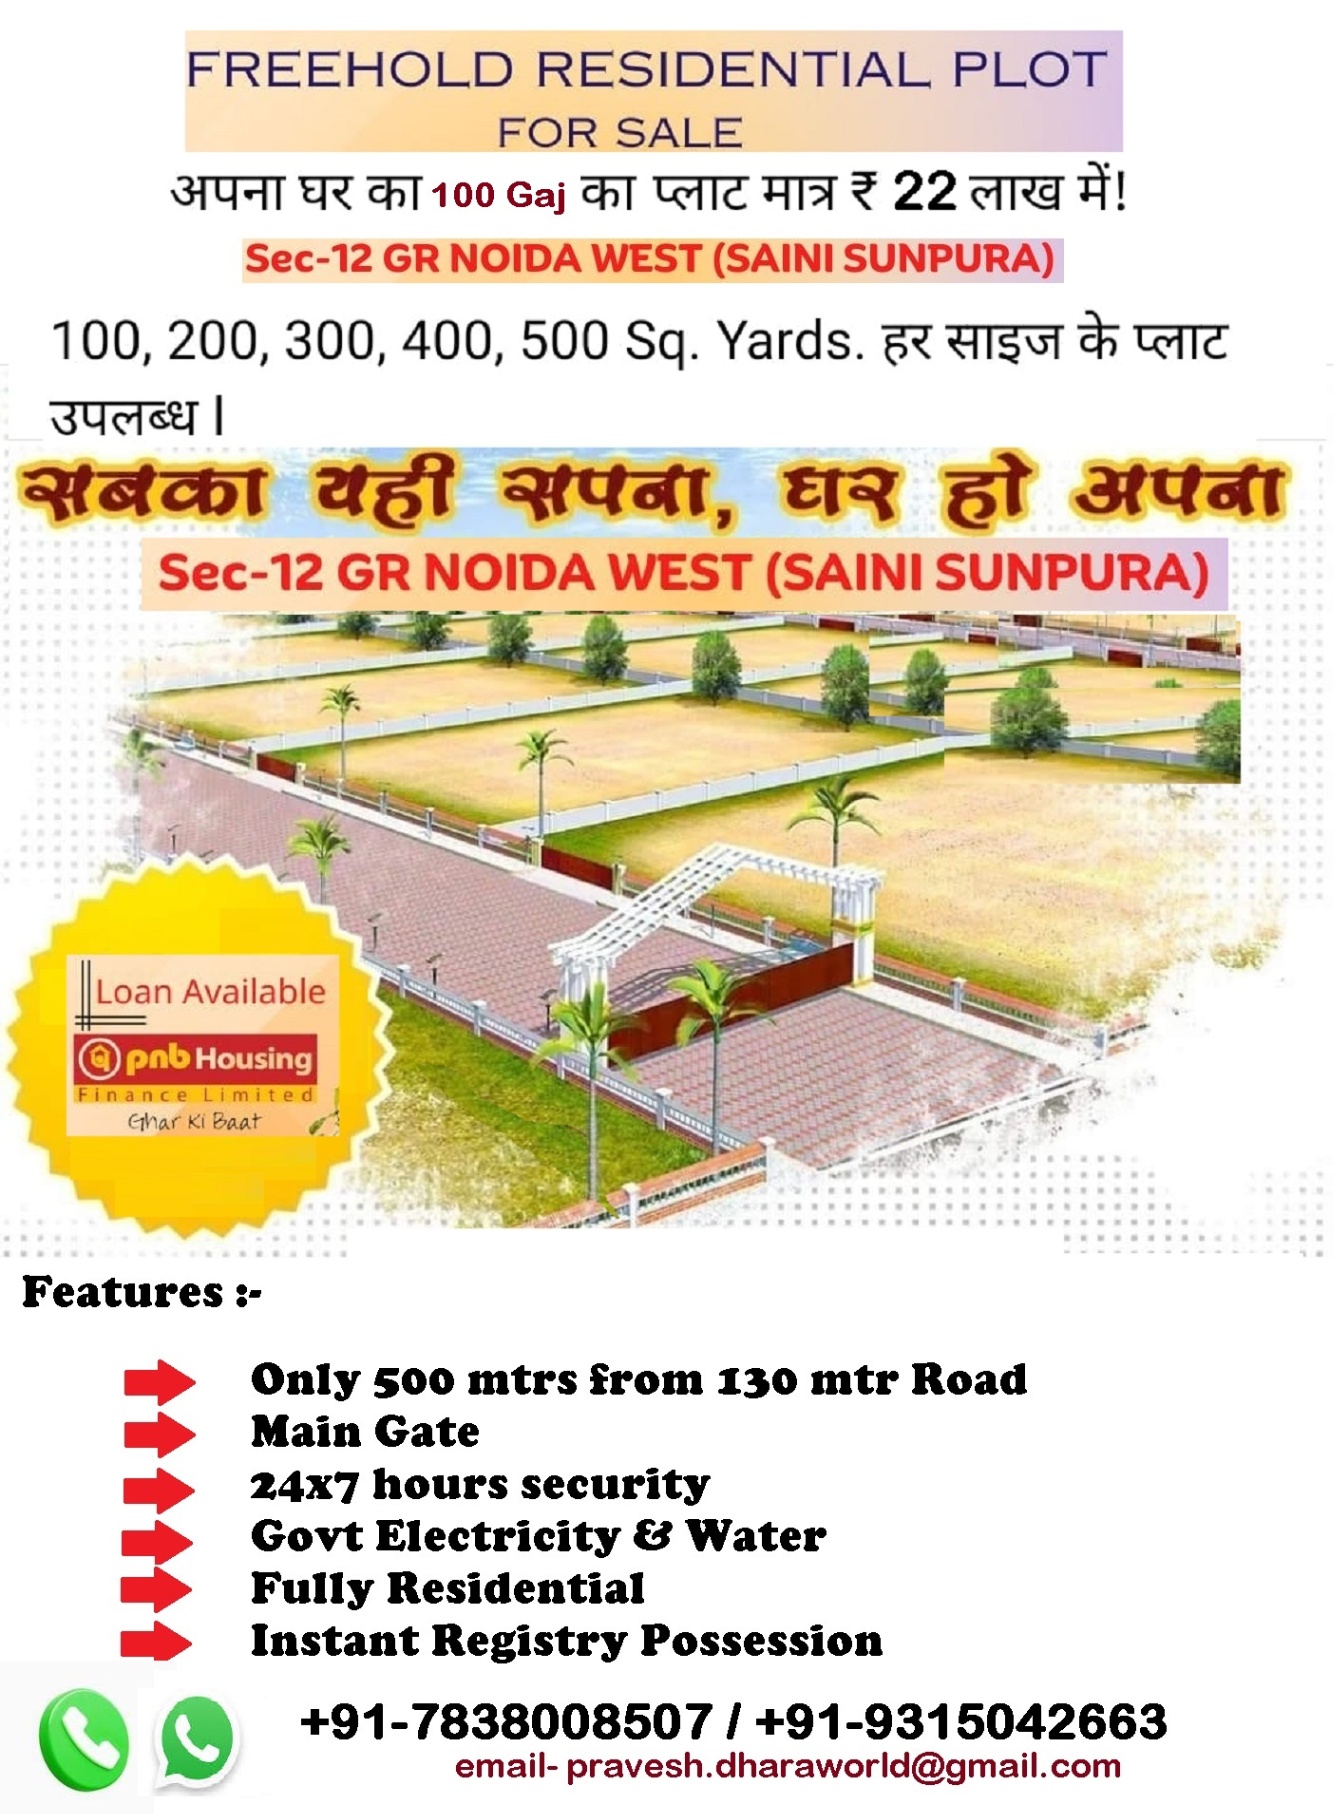 450 sq. ft. Sell Land/ Plot for sale @Greater Noida west